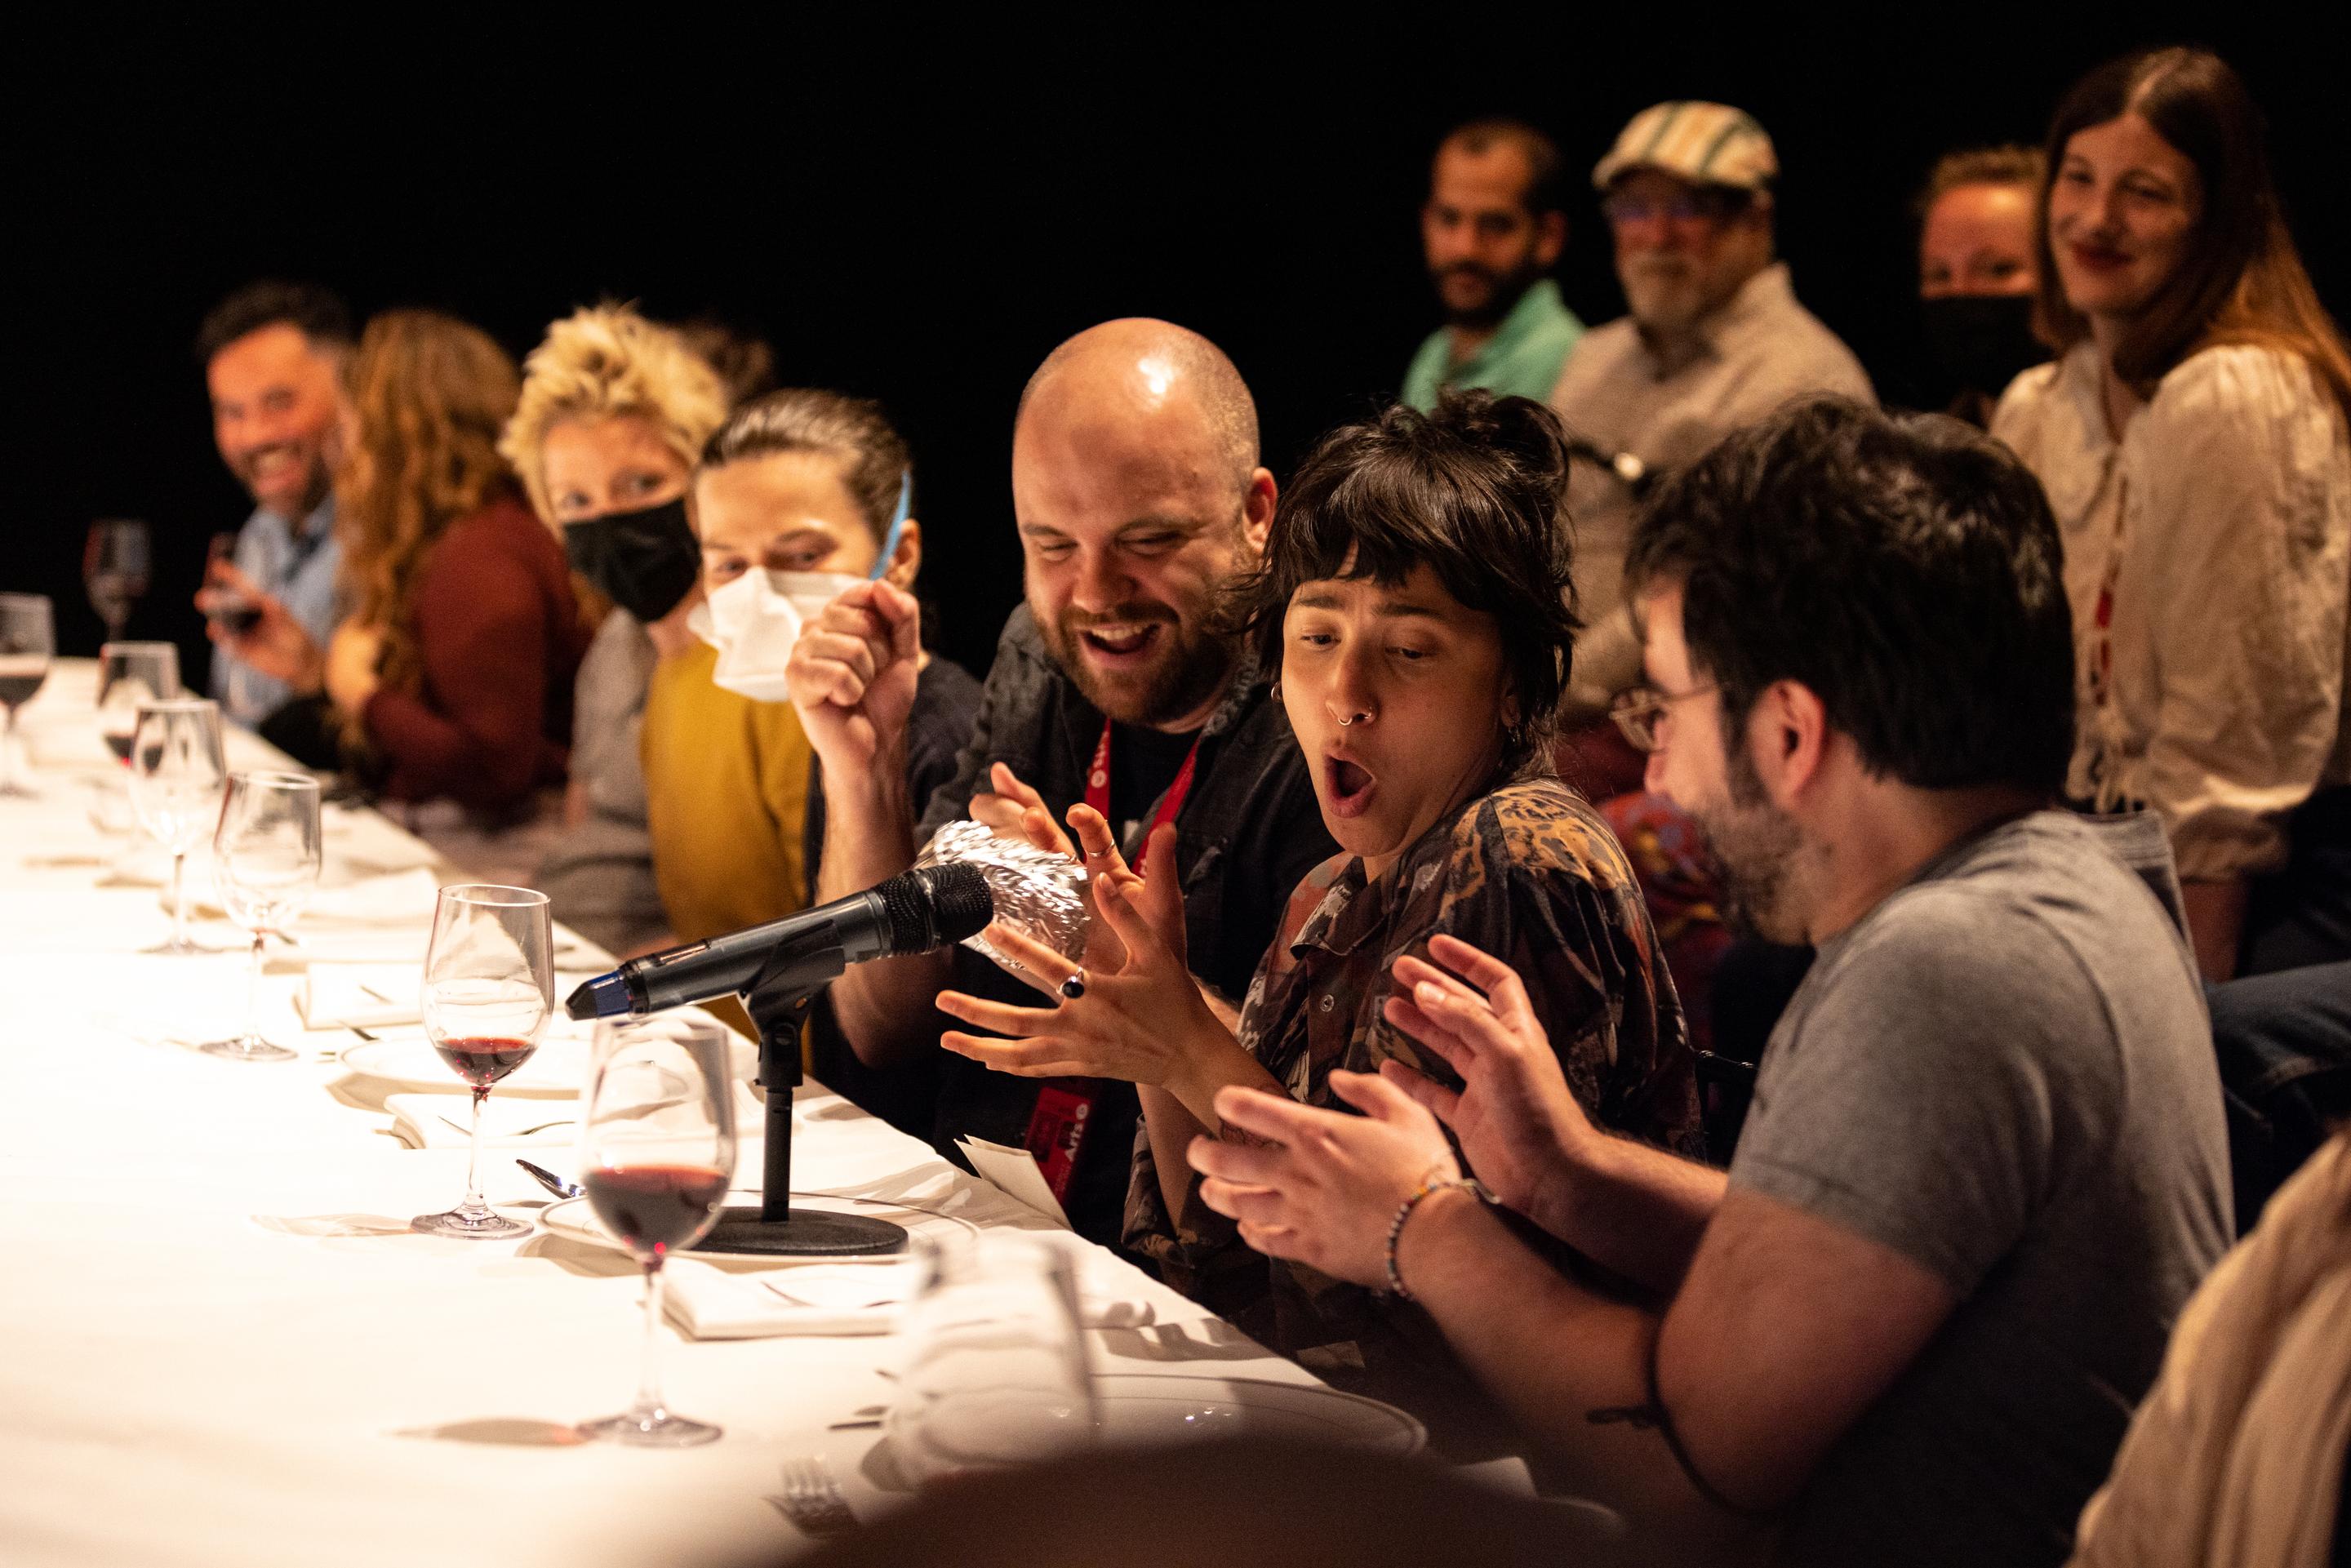 An audience sits in front of a dinner table with plates and wine glasses in front of them. A microphone is on the table and the audience are interacting with it animatedly.